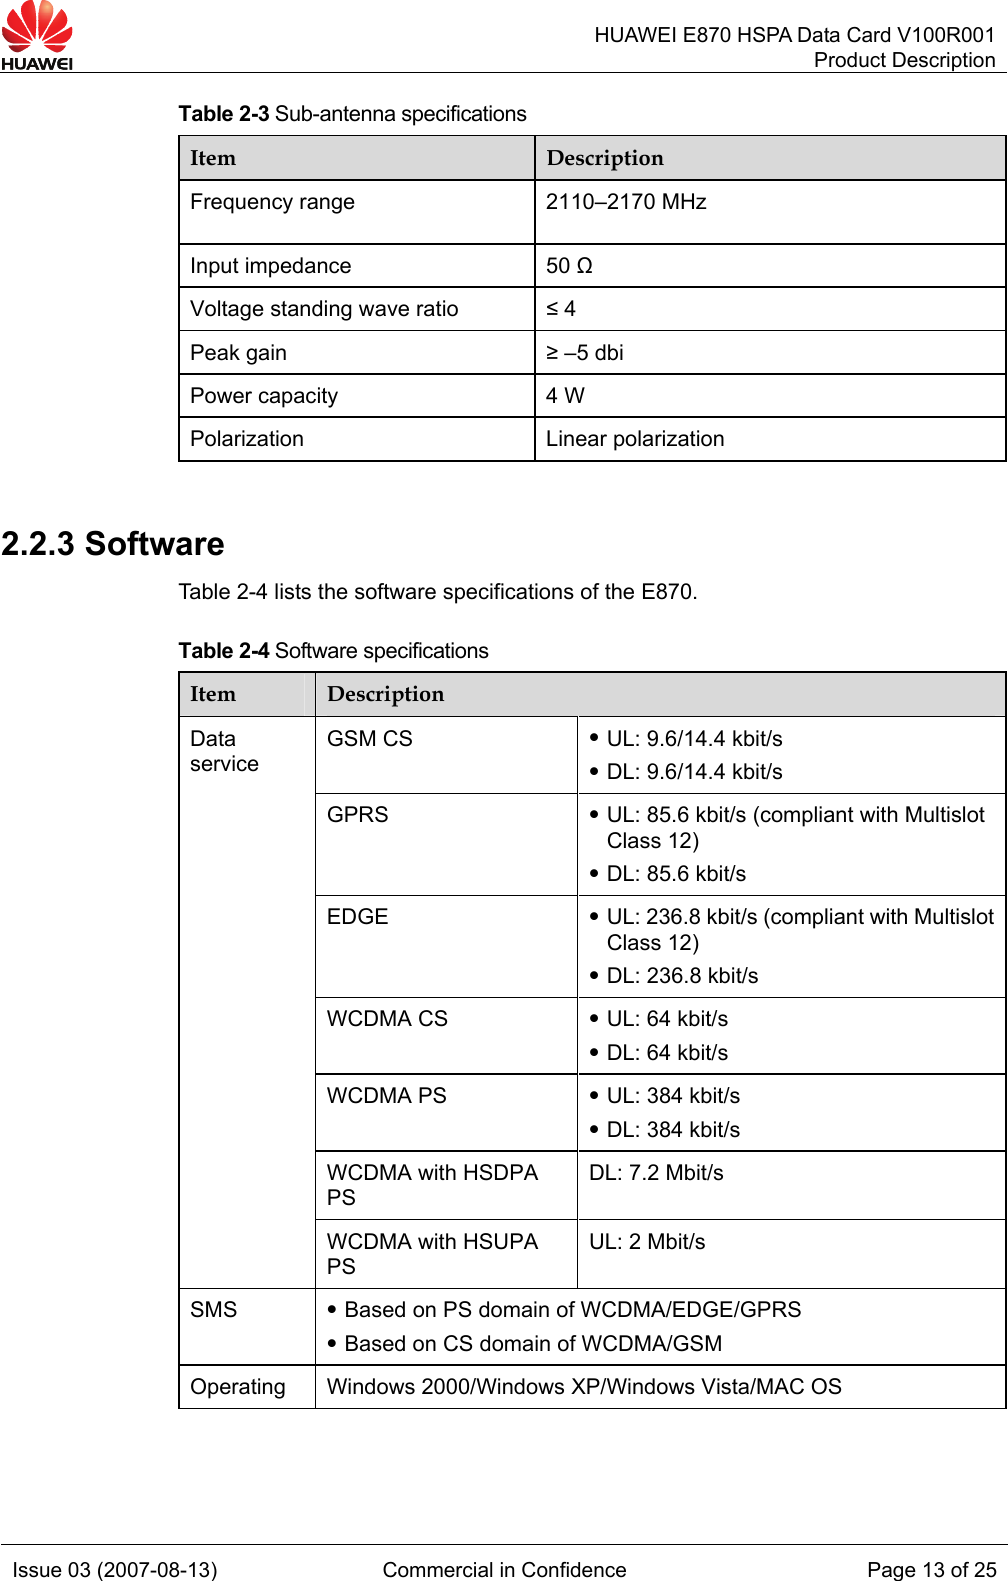   HUAWEI E870 HSPA Data Card V100R001Product Description Issue 03 (2007-08-13)  Commercial in Confidence  Page 13 of 25 Table 2-3 Sub-antenna specifications Item  Description Frequency range  2110–2170 MHz Input impedance  50 Ω Voltage standing wave ratio  ≤ 4 Peak gain  ≥ –5 dbi Power capacity  4 W Polarization Linear polarization  2.2.3 Software Table 2-4 lists the software specifications of the E870. Table 2-4 Software specifications Item  Description GSM CS  z UL: 9.6/14.4 kbit/s z DL: 9.6/14.4 kbit/s GPRS  z UL: 85.6 kbit/s (compliant with Multislot Class 12) z DL: 85.6 kbit/s EDGE  z UL: 236.8 kbit/s (compliant with Multislot Class 12) z DL: 236.8 kbit/s WCDMA CS  z UL: 64 kbit/s z DL: 64 kbit/s WCDMA PS  z UL: 384 kbit/s z DL: 384 kbit/s WCDMA with HSDPA PS DL: 7.2 Mbit/s Data service WCDMA with HSUPA PS UL: 2 Mbit/s SMS  z Based on PS domain of WCDMA/EDGE/GPRS z Based on CS domain of WCDMA/GSM Operating Windows 2000/Windows XP/Windows Vista/MAC OS 